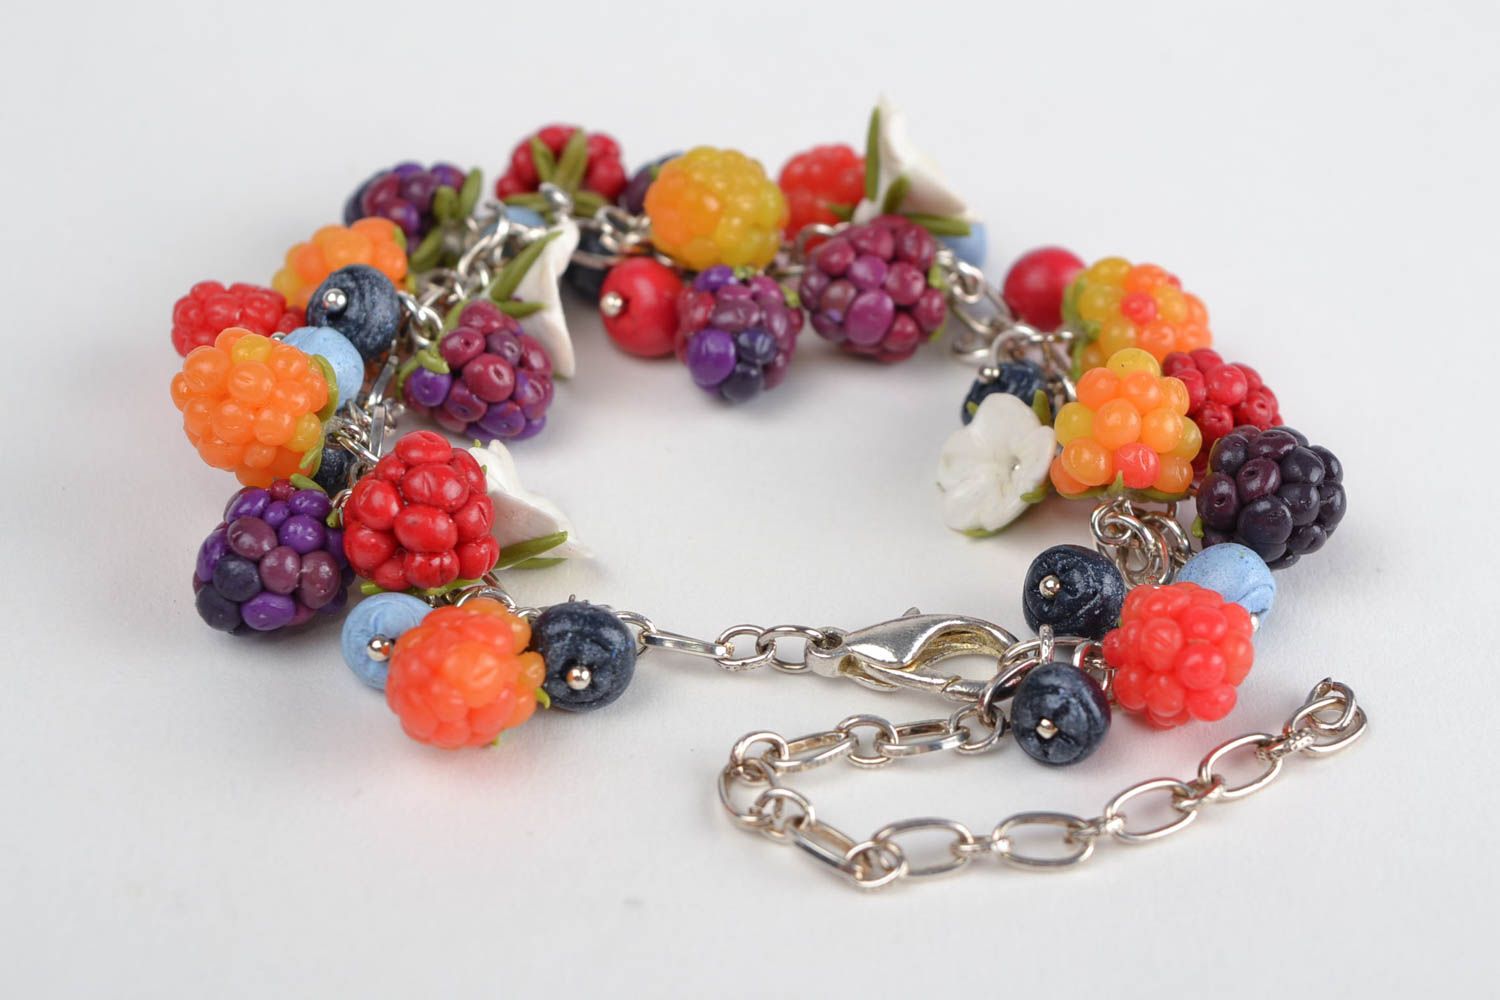 Handmade chain wrist bracelet with polymer clay colorful berries and flowers photo 5